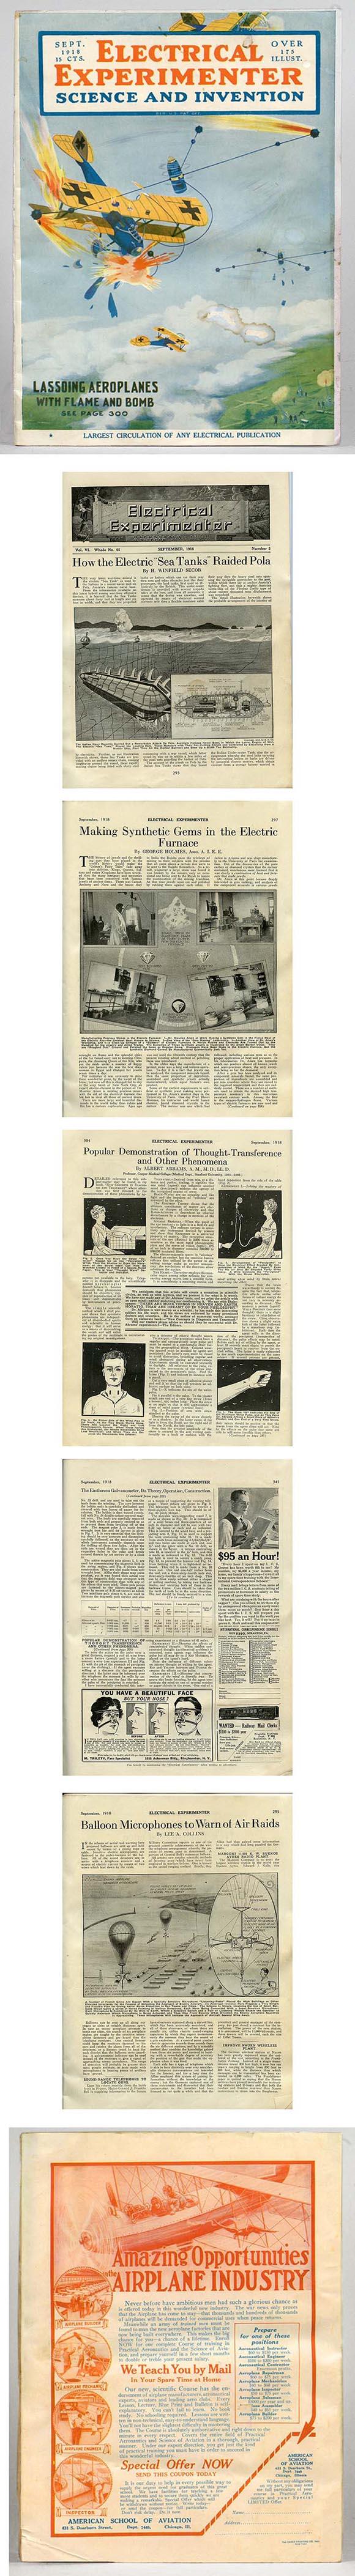 1918 Electrical Experimenter Science & Invention